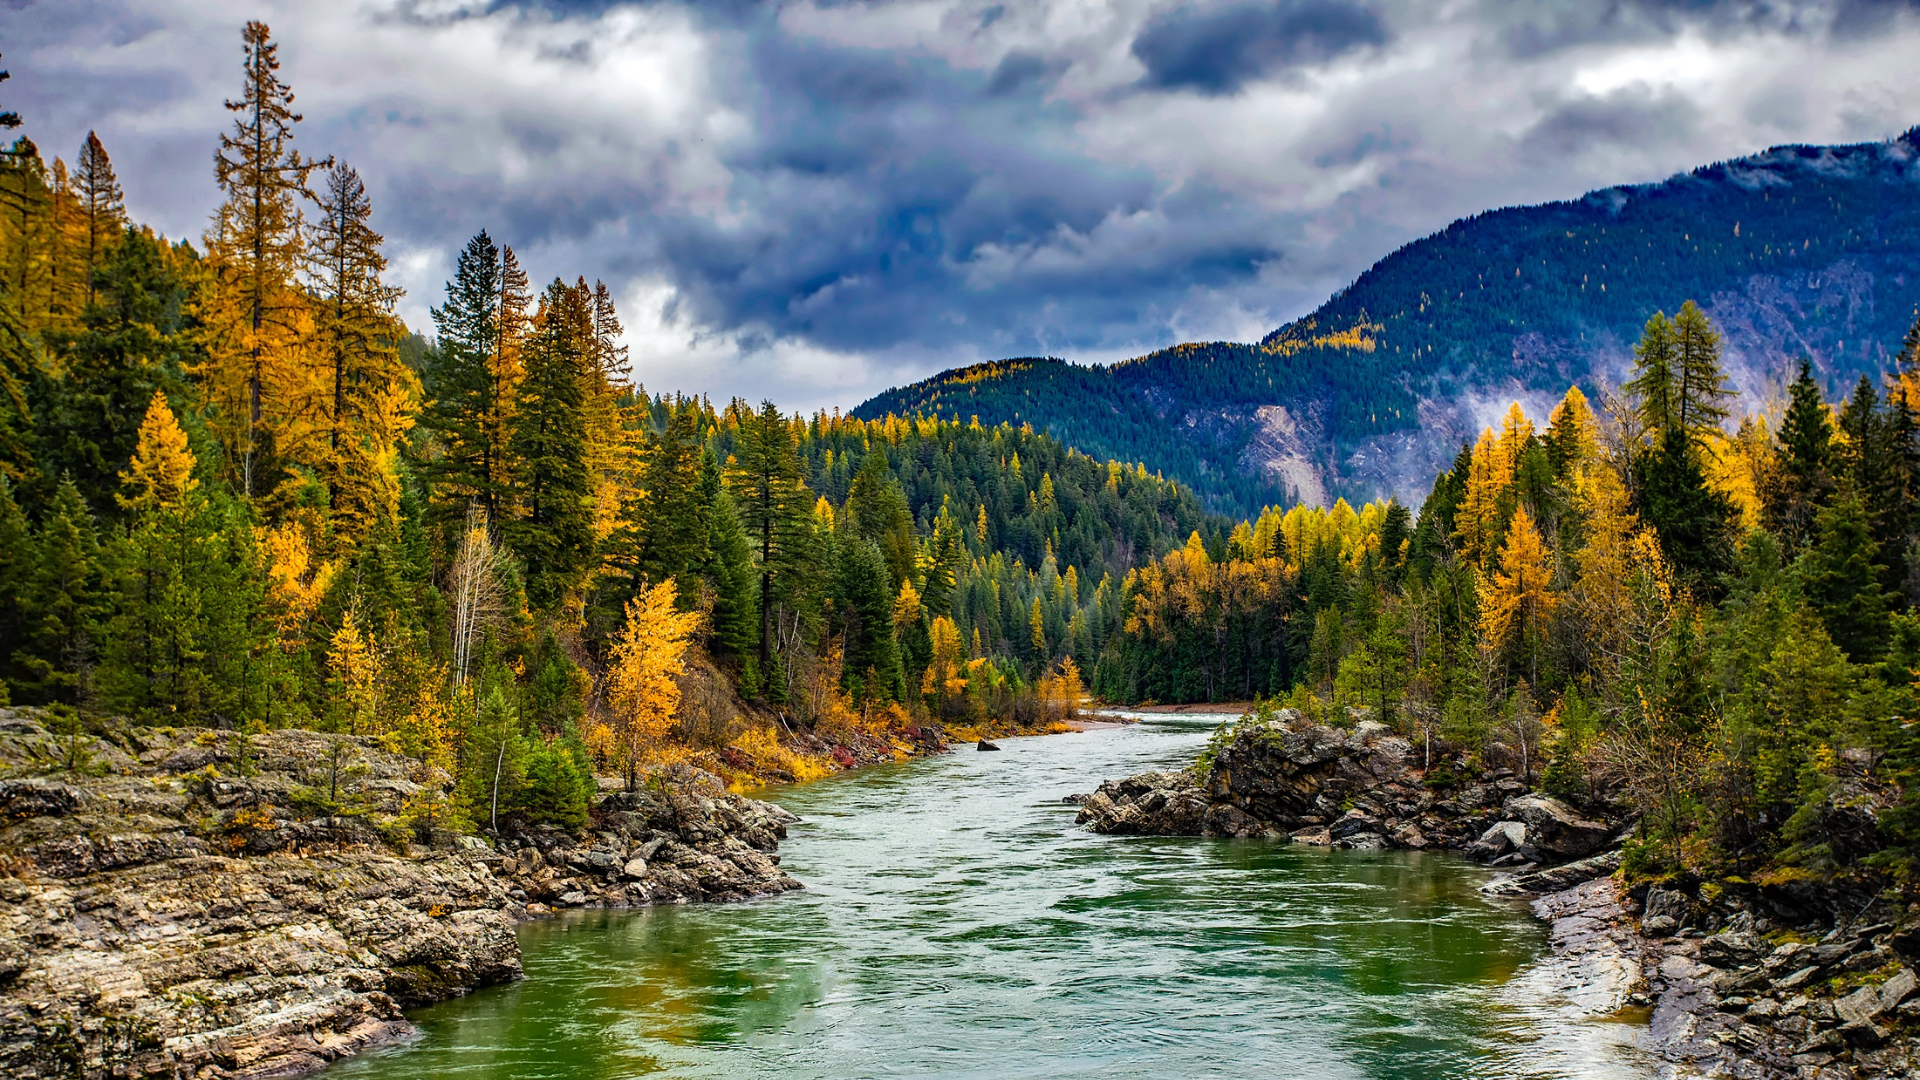 Photo of trees, river, and mountain in Montana.